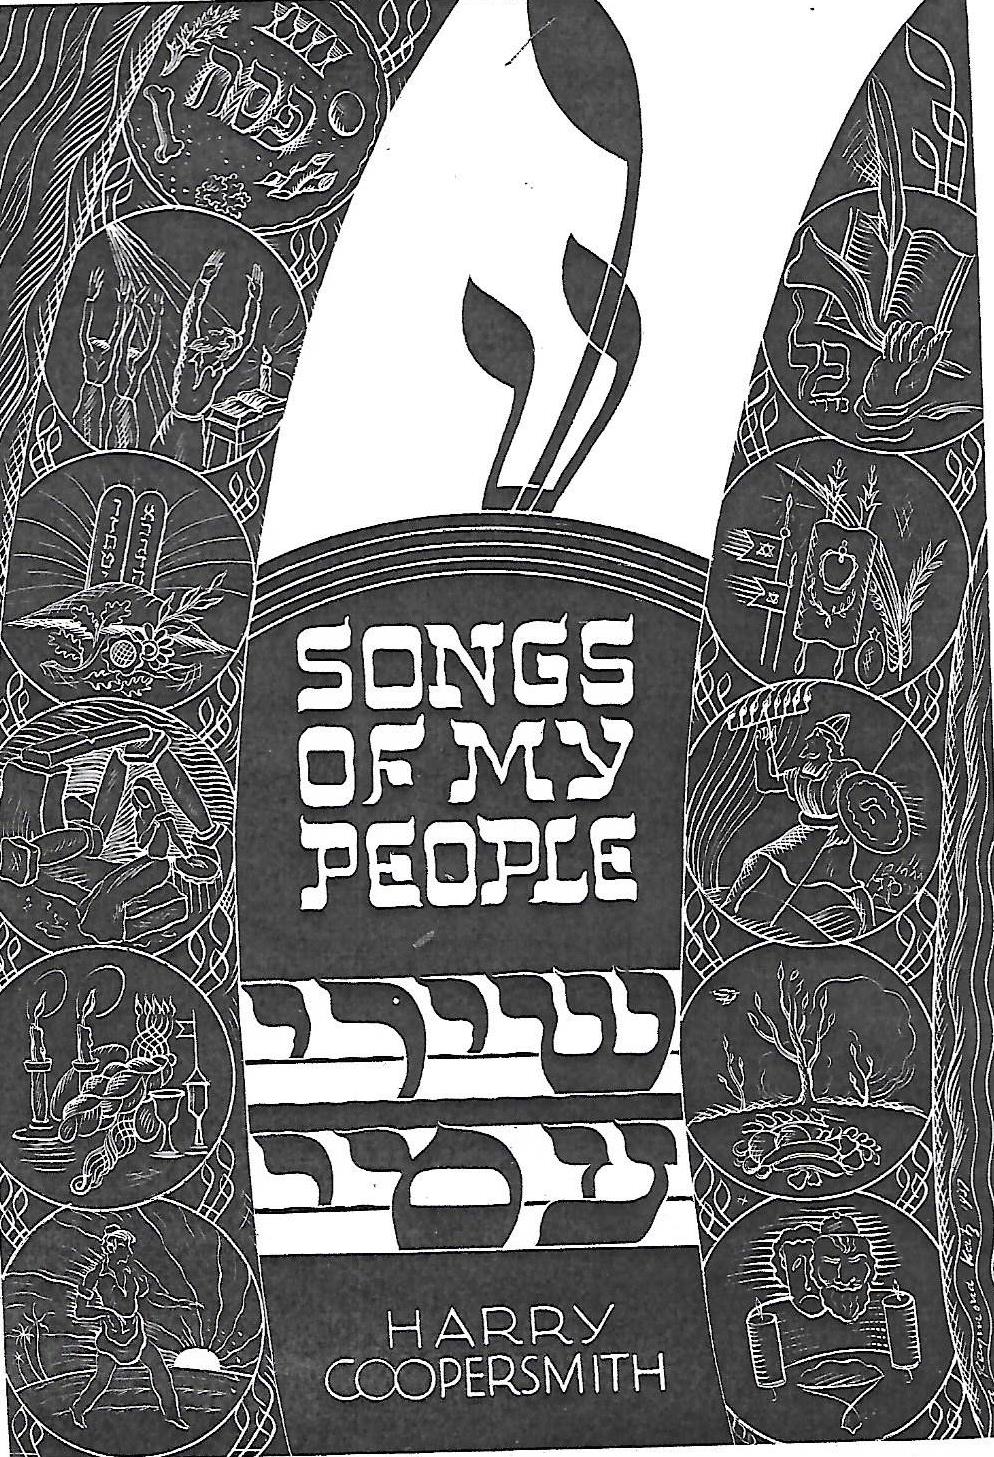  Songs of my People Book cover